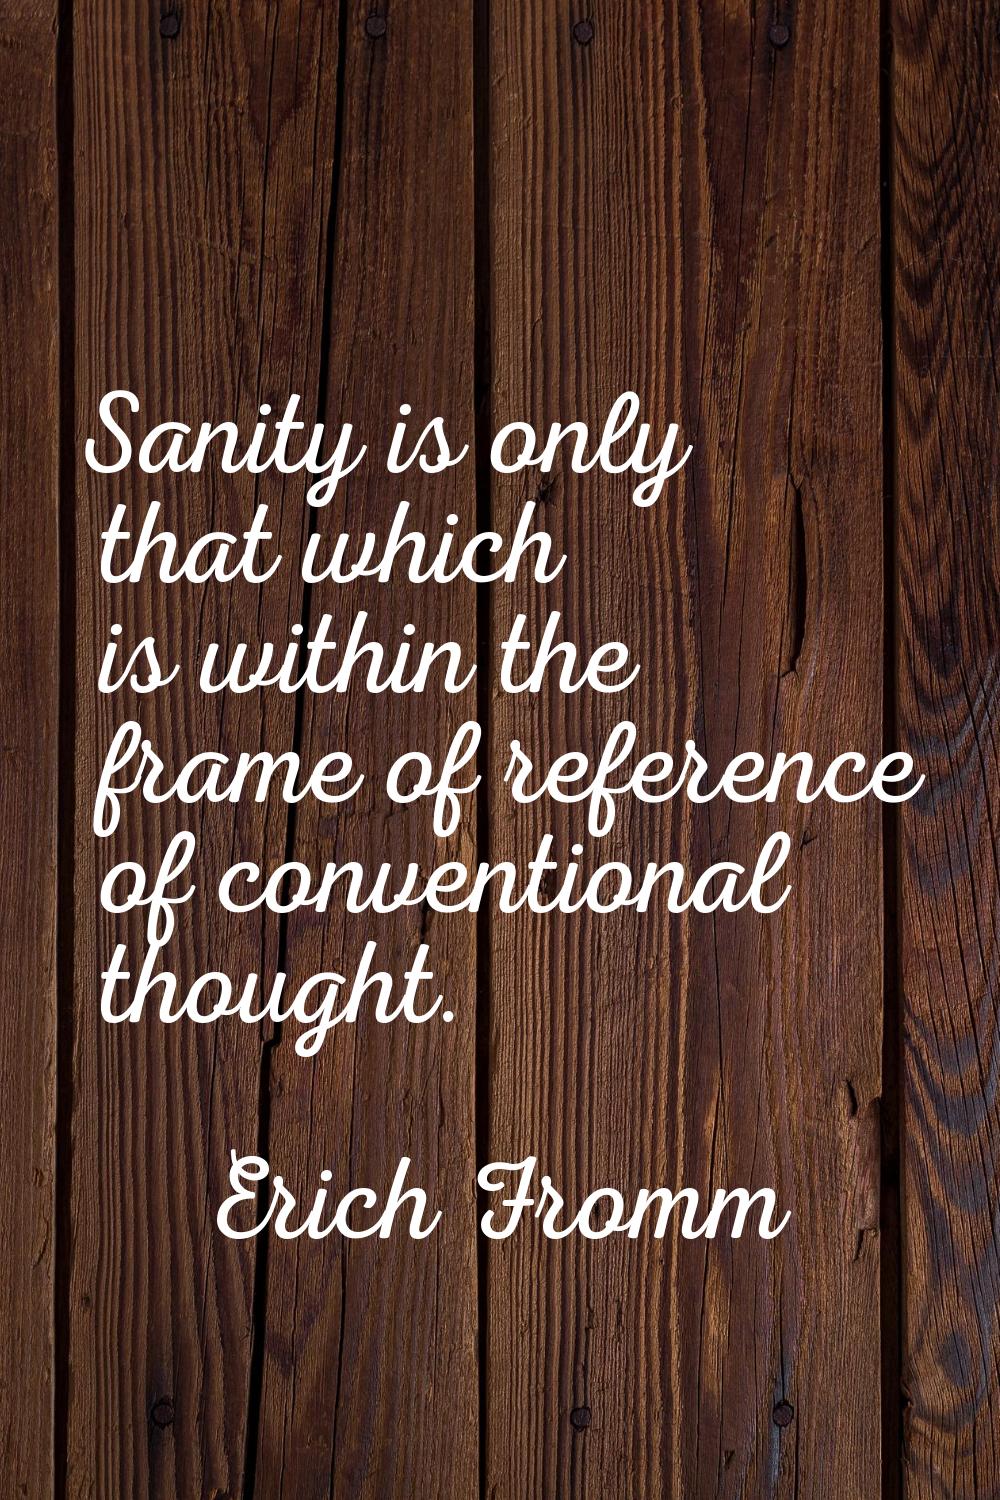 Sanity is only that which is within the frame of reference of conventional thought.